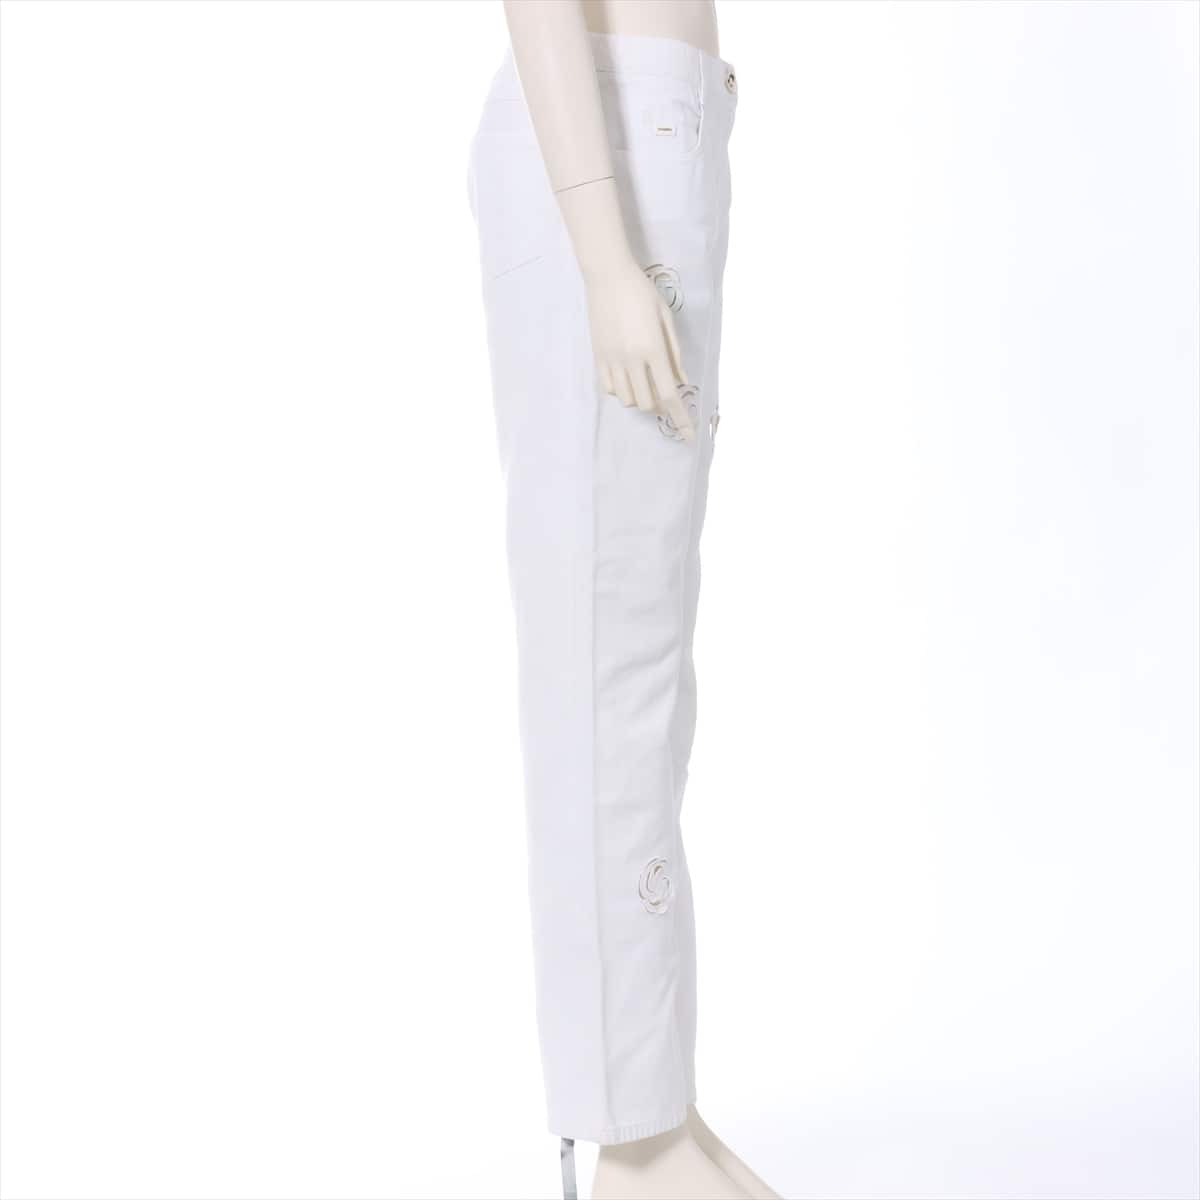 Chanel Camelia Cotton Denim pants 40 Ladies' White  The printing on the model year tag has disappeared, and there are stains on the crotch etc.